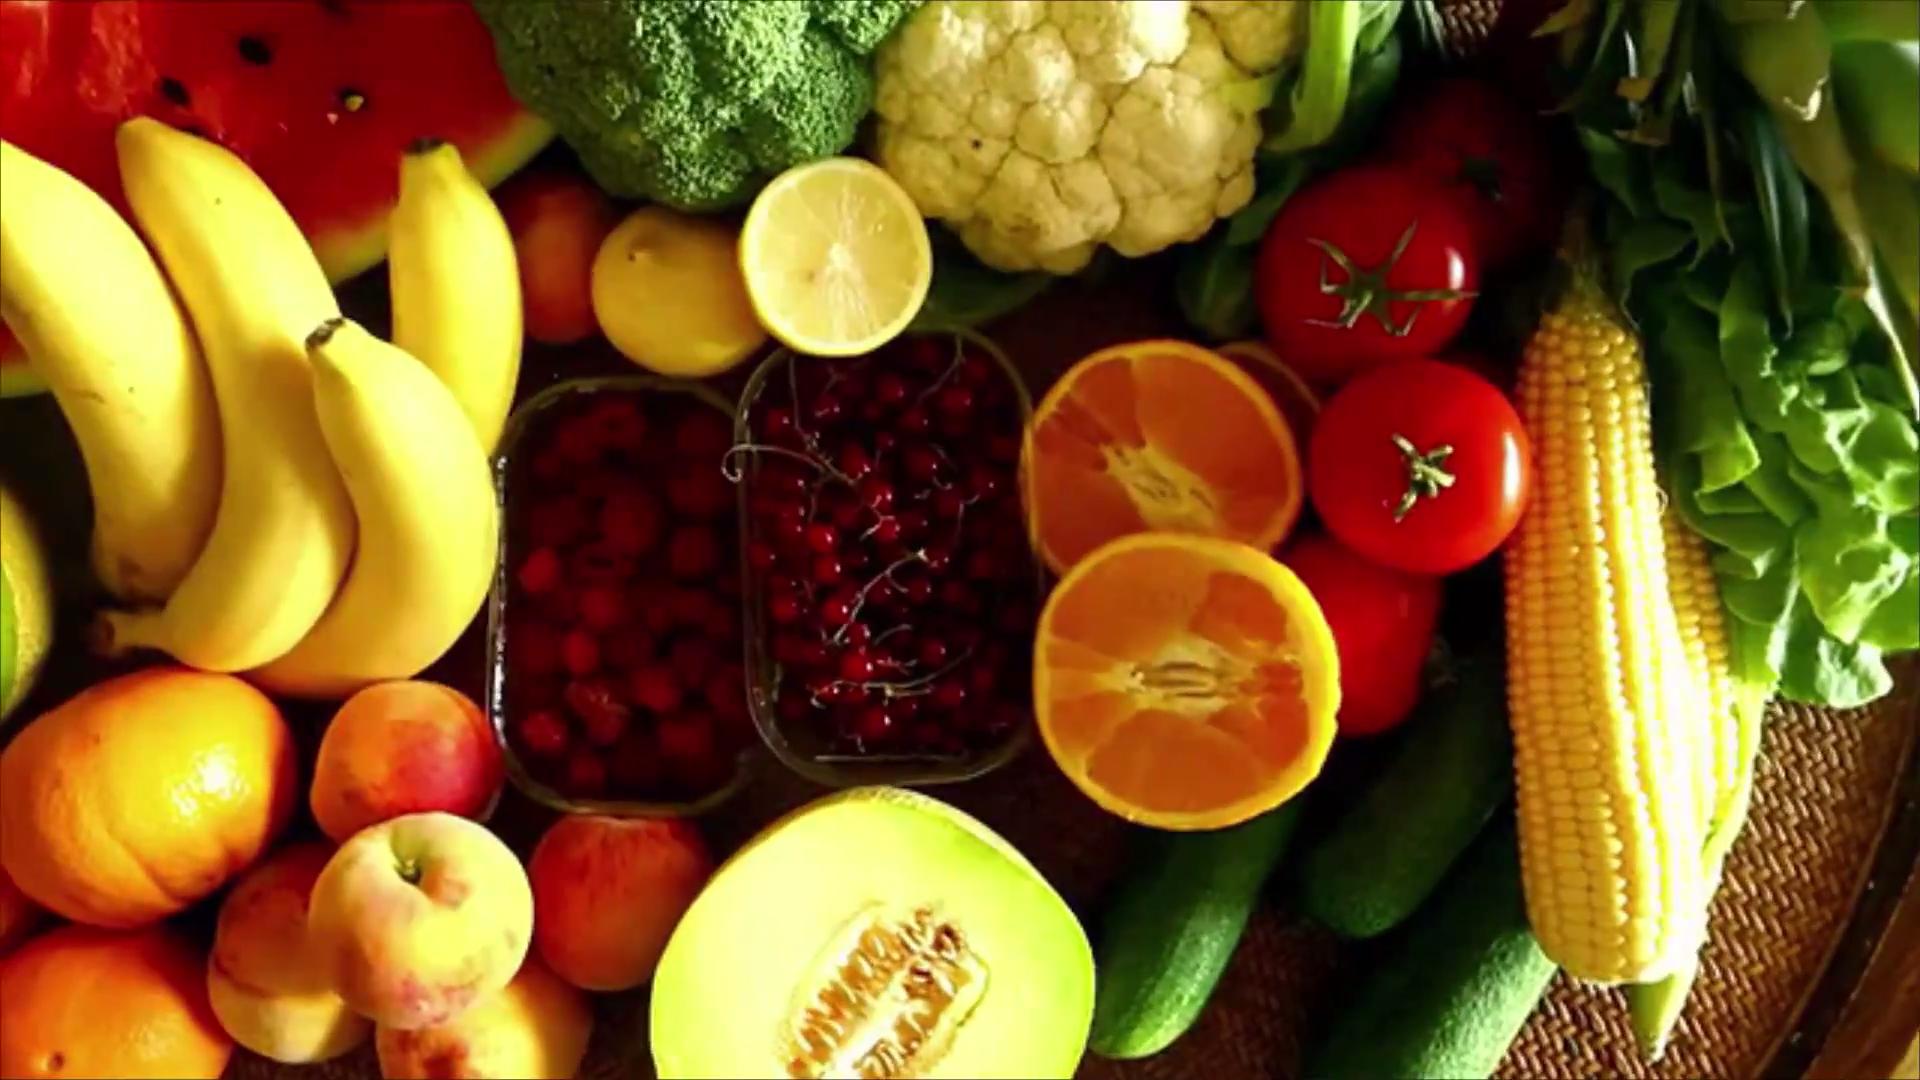 Fruits and Vegetables: How Much Is a Serving?